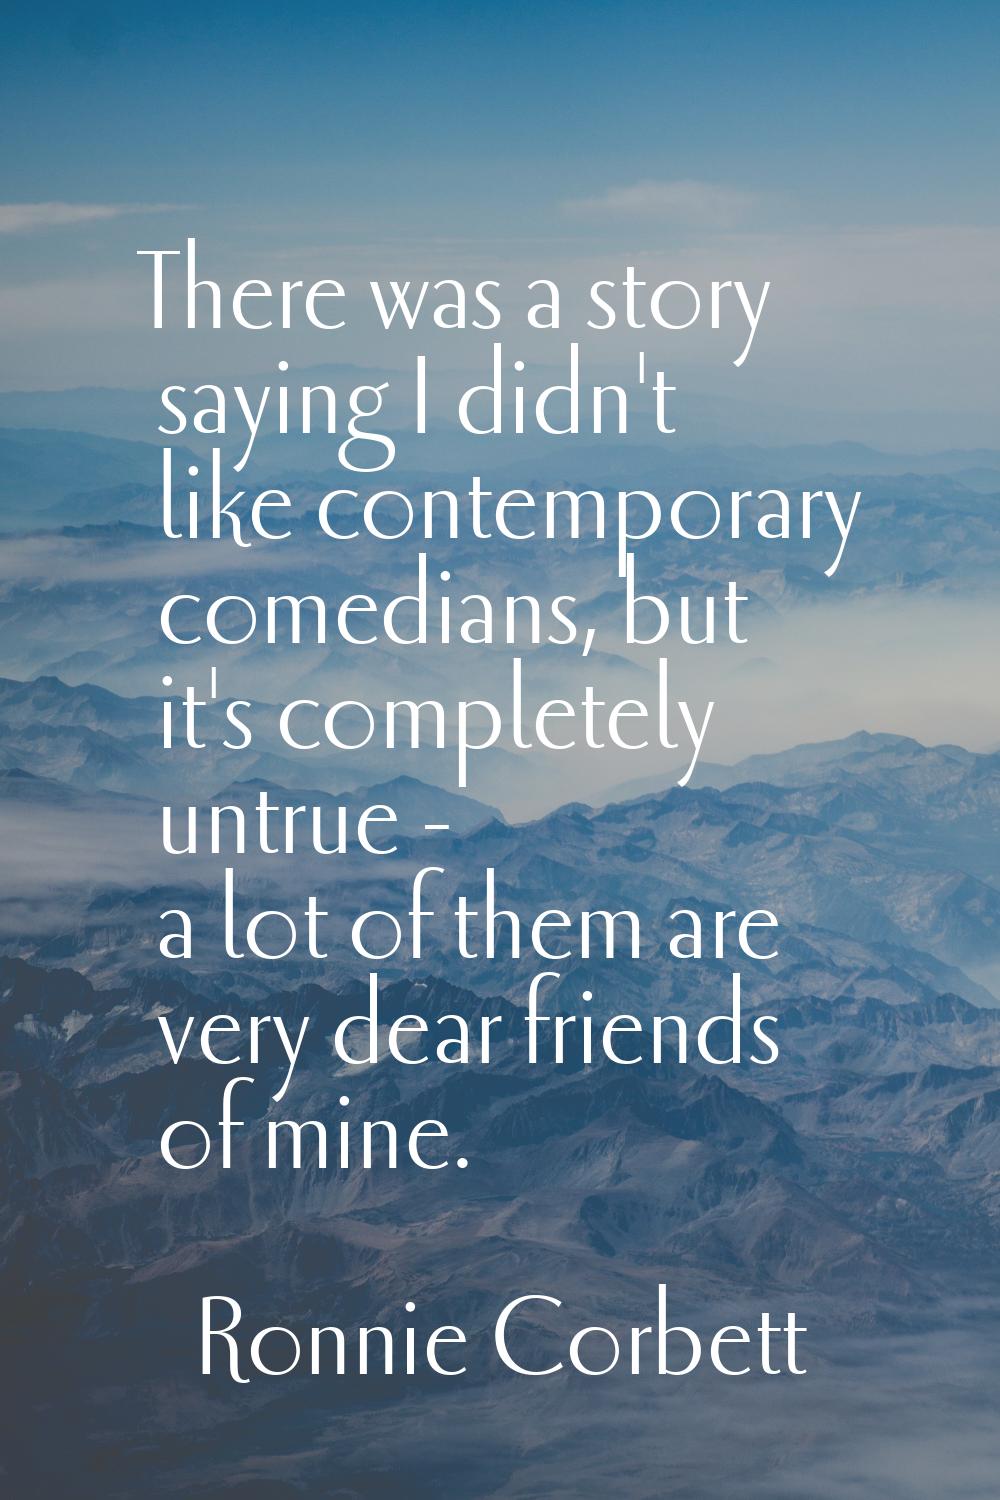 There was a story saying I didn't like contemporary comedians, but it's completely untrue - a lot o